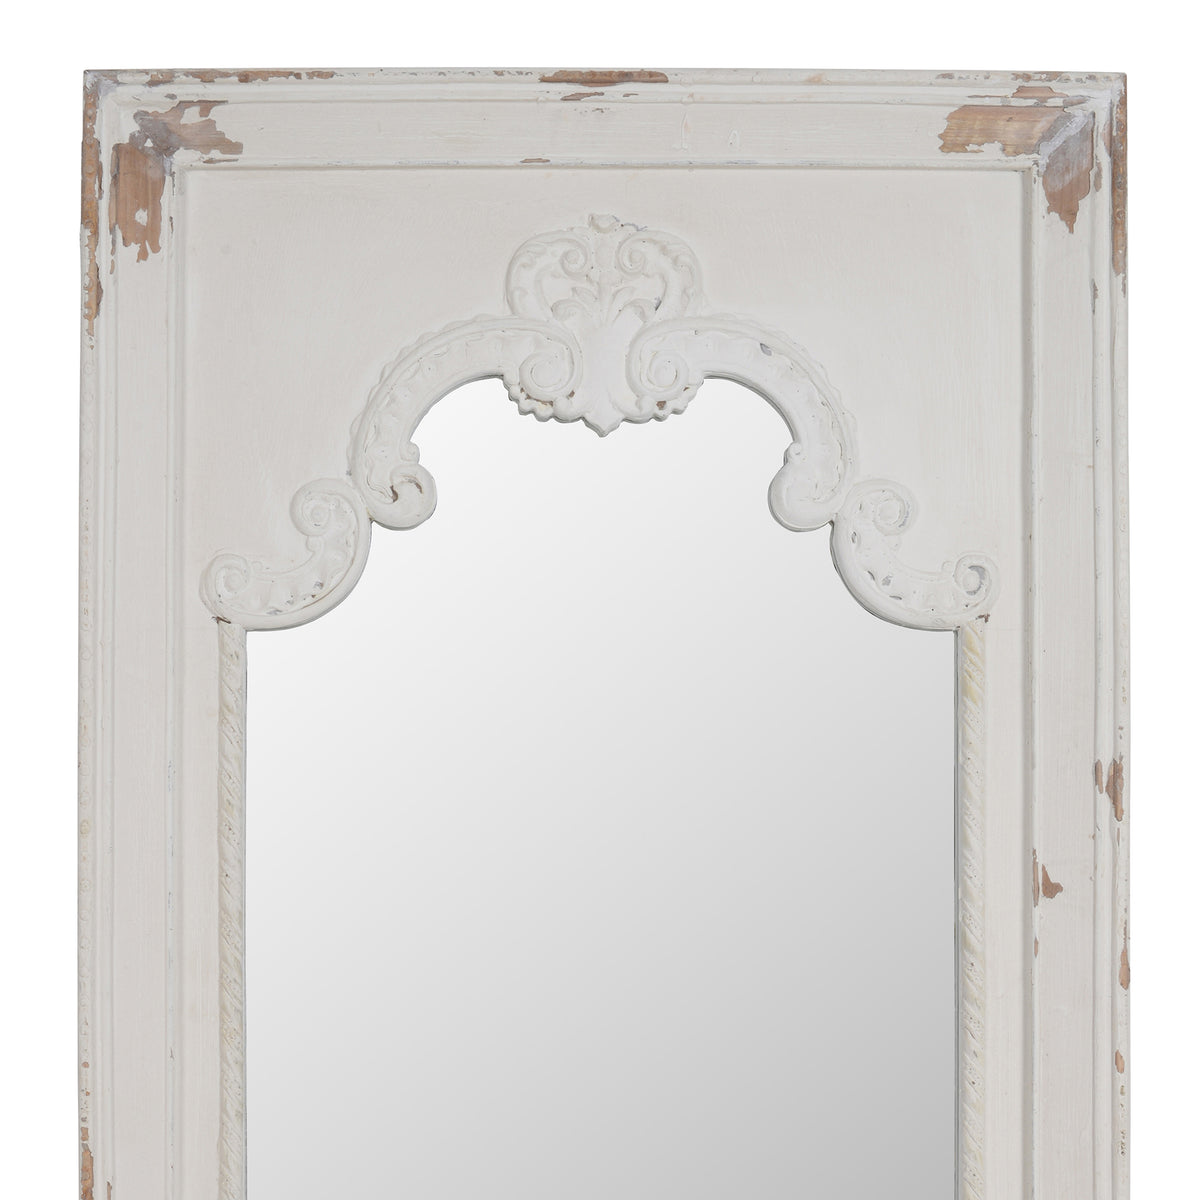 Wooden Rectangle Wall Mirror with Chipped Edges and Hook, White - BM202270